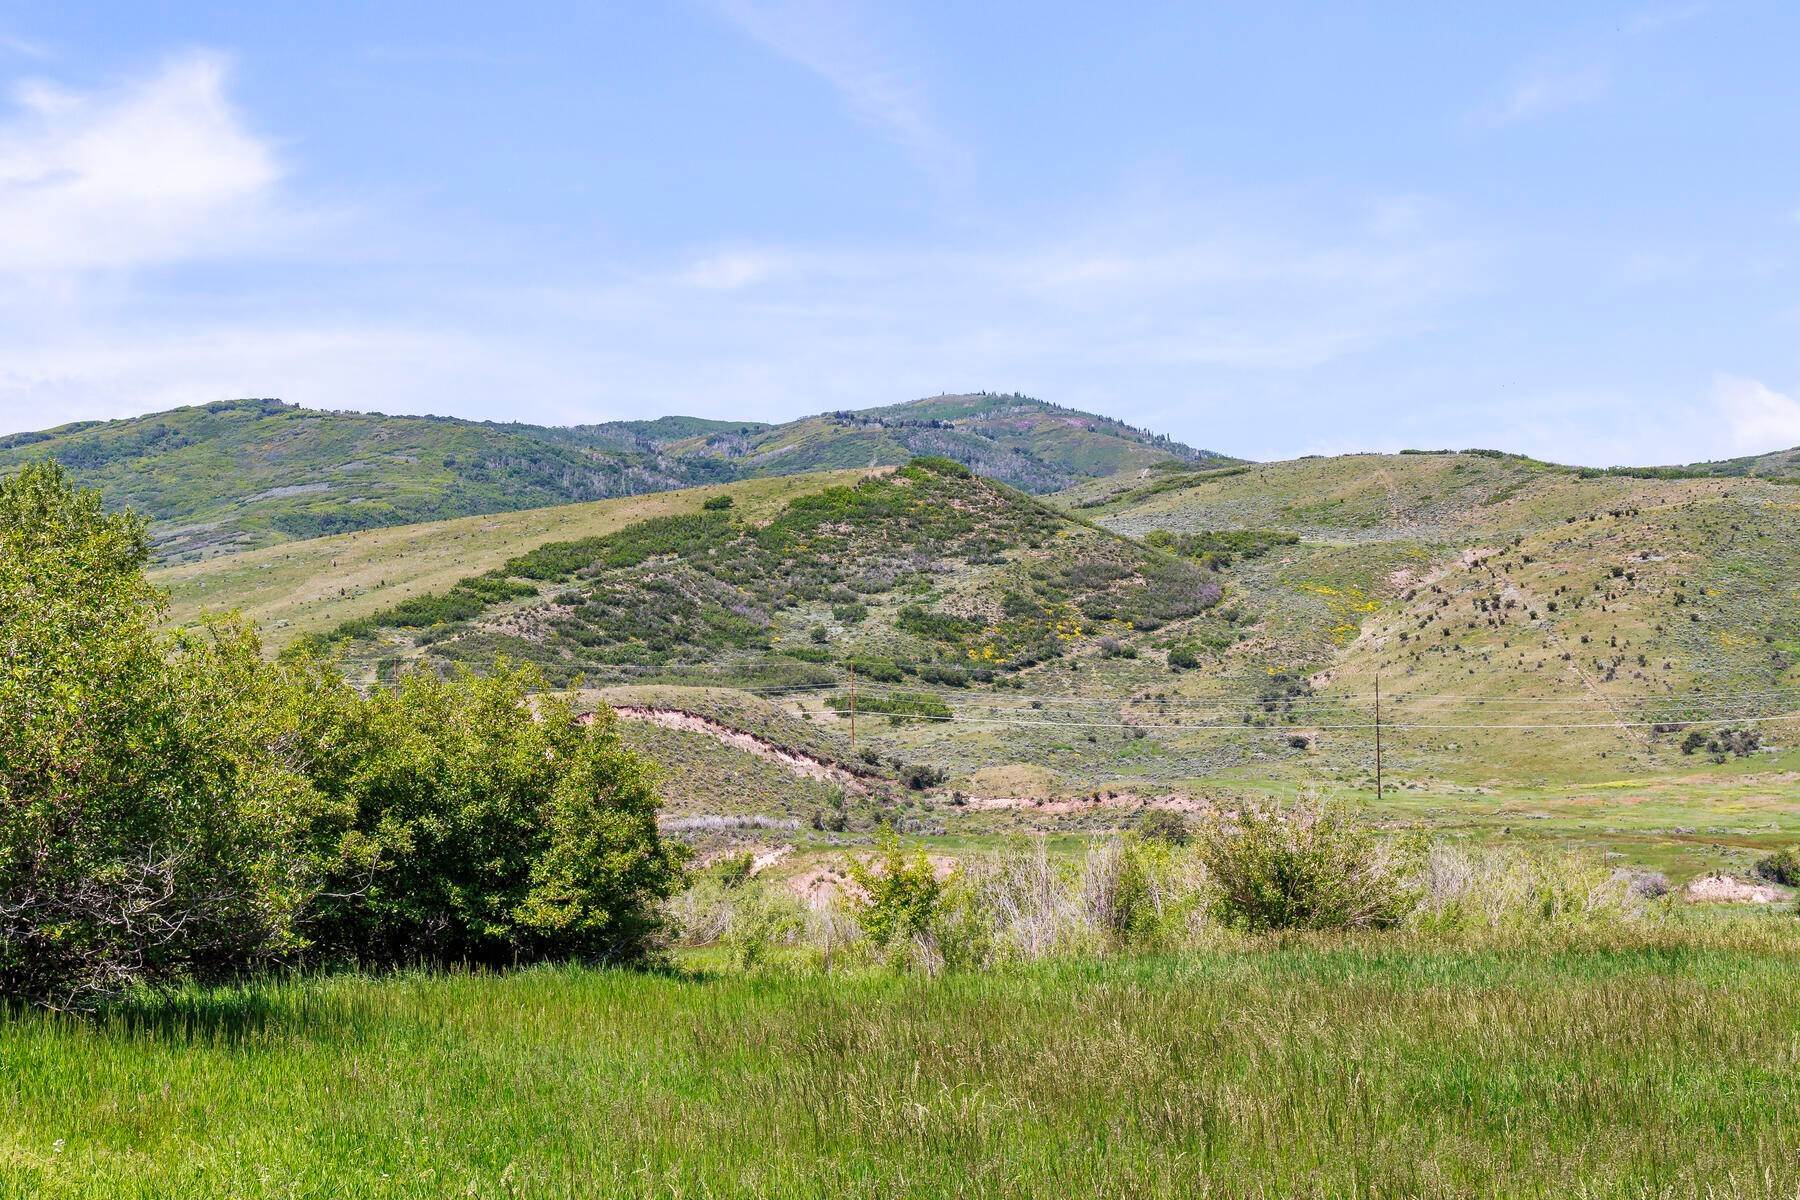 29. Farm and Ranch Properties for Sale at 261 Acres on the Weber River only 15 minutes from Park City 1255 S West Hoytsville Rd Hoytsville, Utah 84017 United States